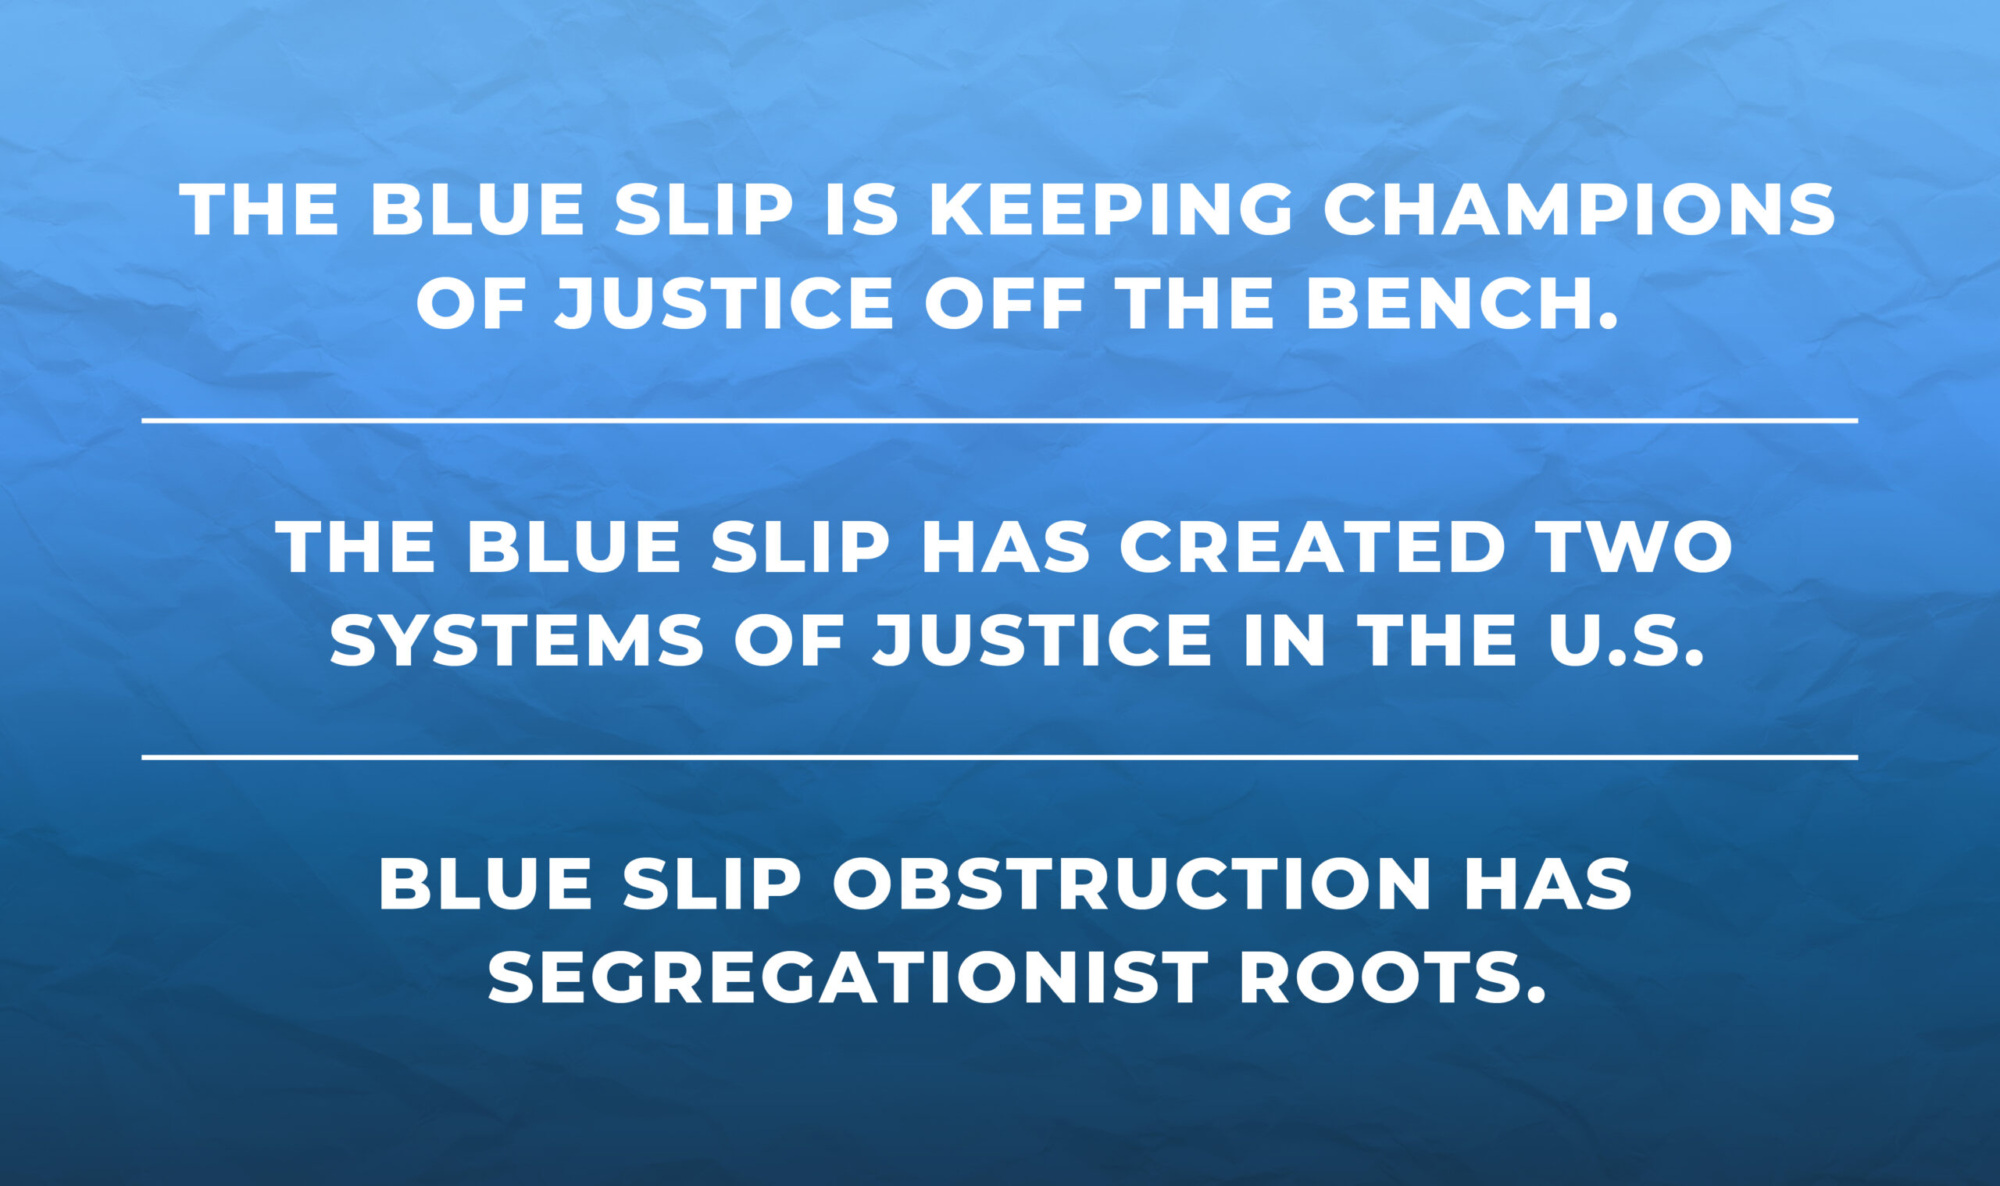 Blue graphic appearing to be on crumpled-up paper, reading "The blue slip is keeping champions of justice off the bench; The Blue slip has created two systems of justice in the U.S.; Blue slip obstructuon has segregationist roots.